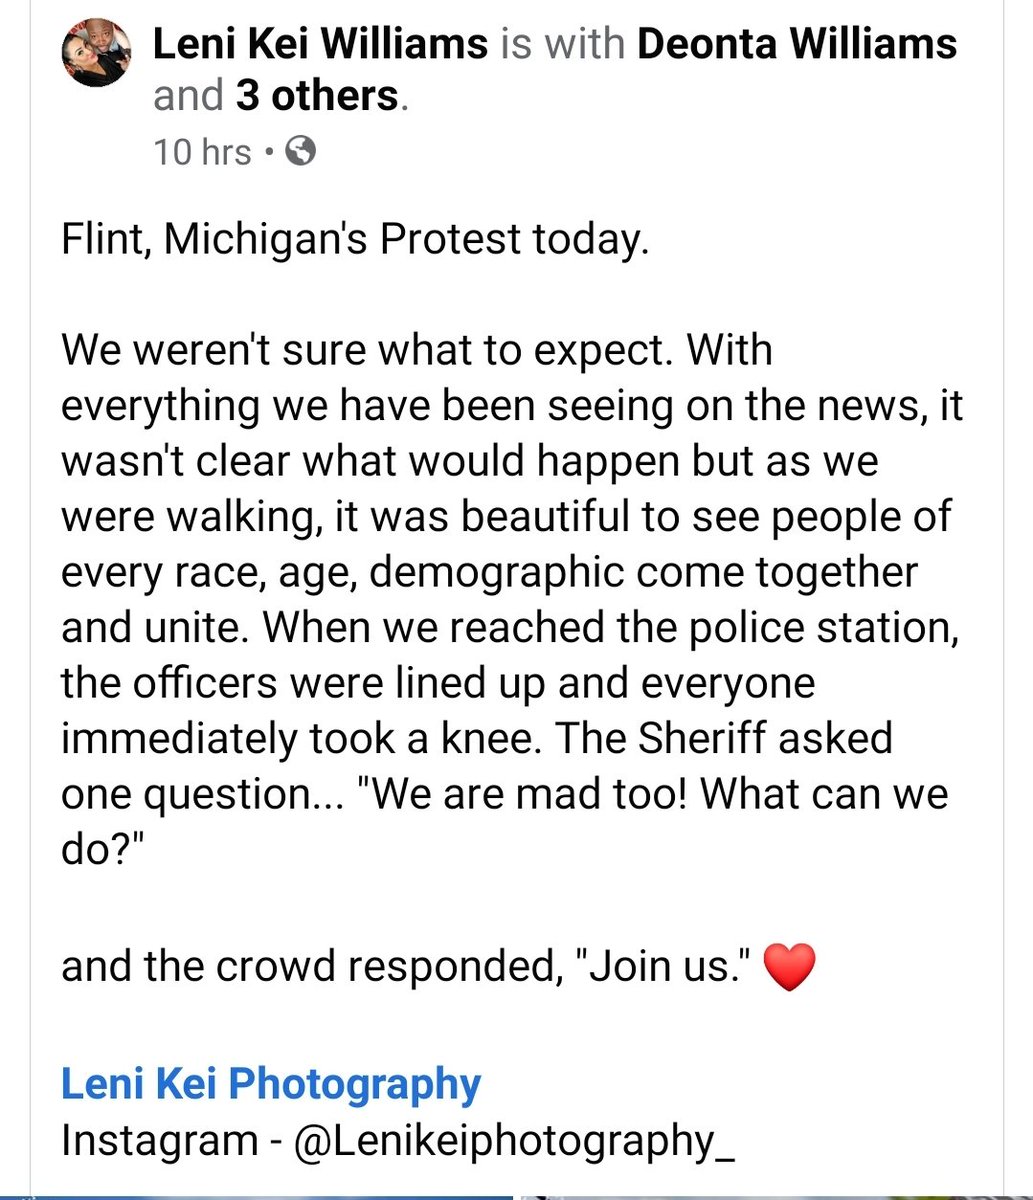 Here's what Leni Kei Williams had to say about the protest on Facebook: